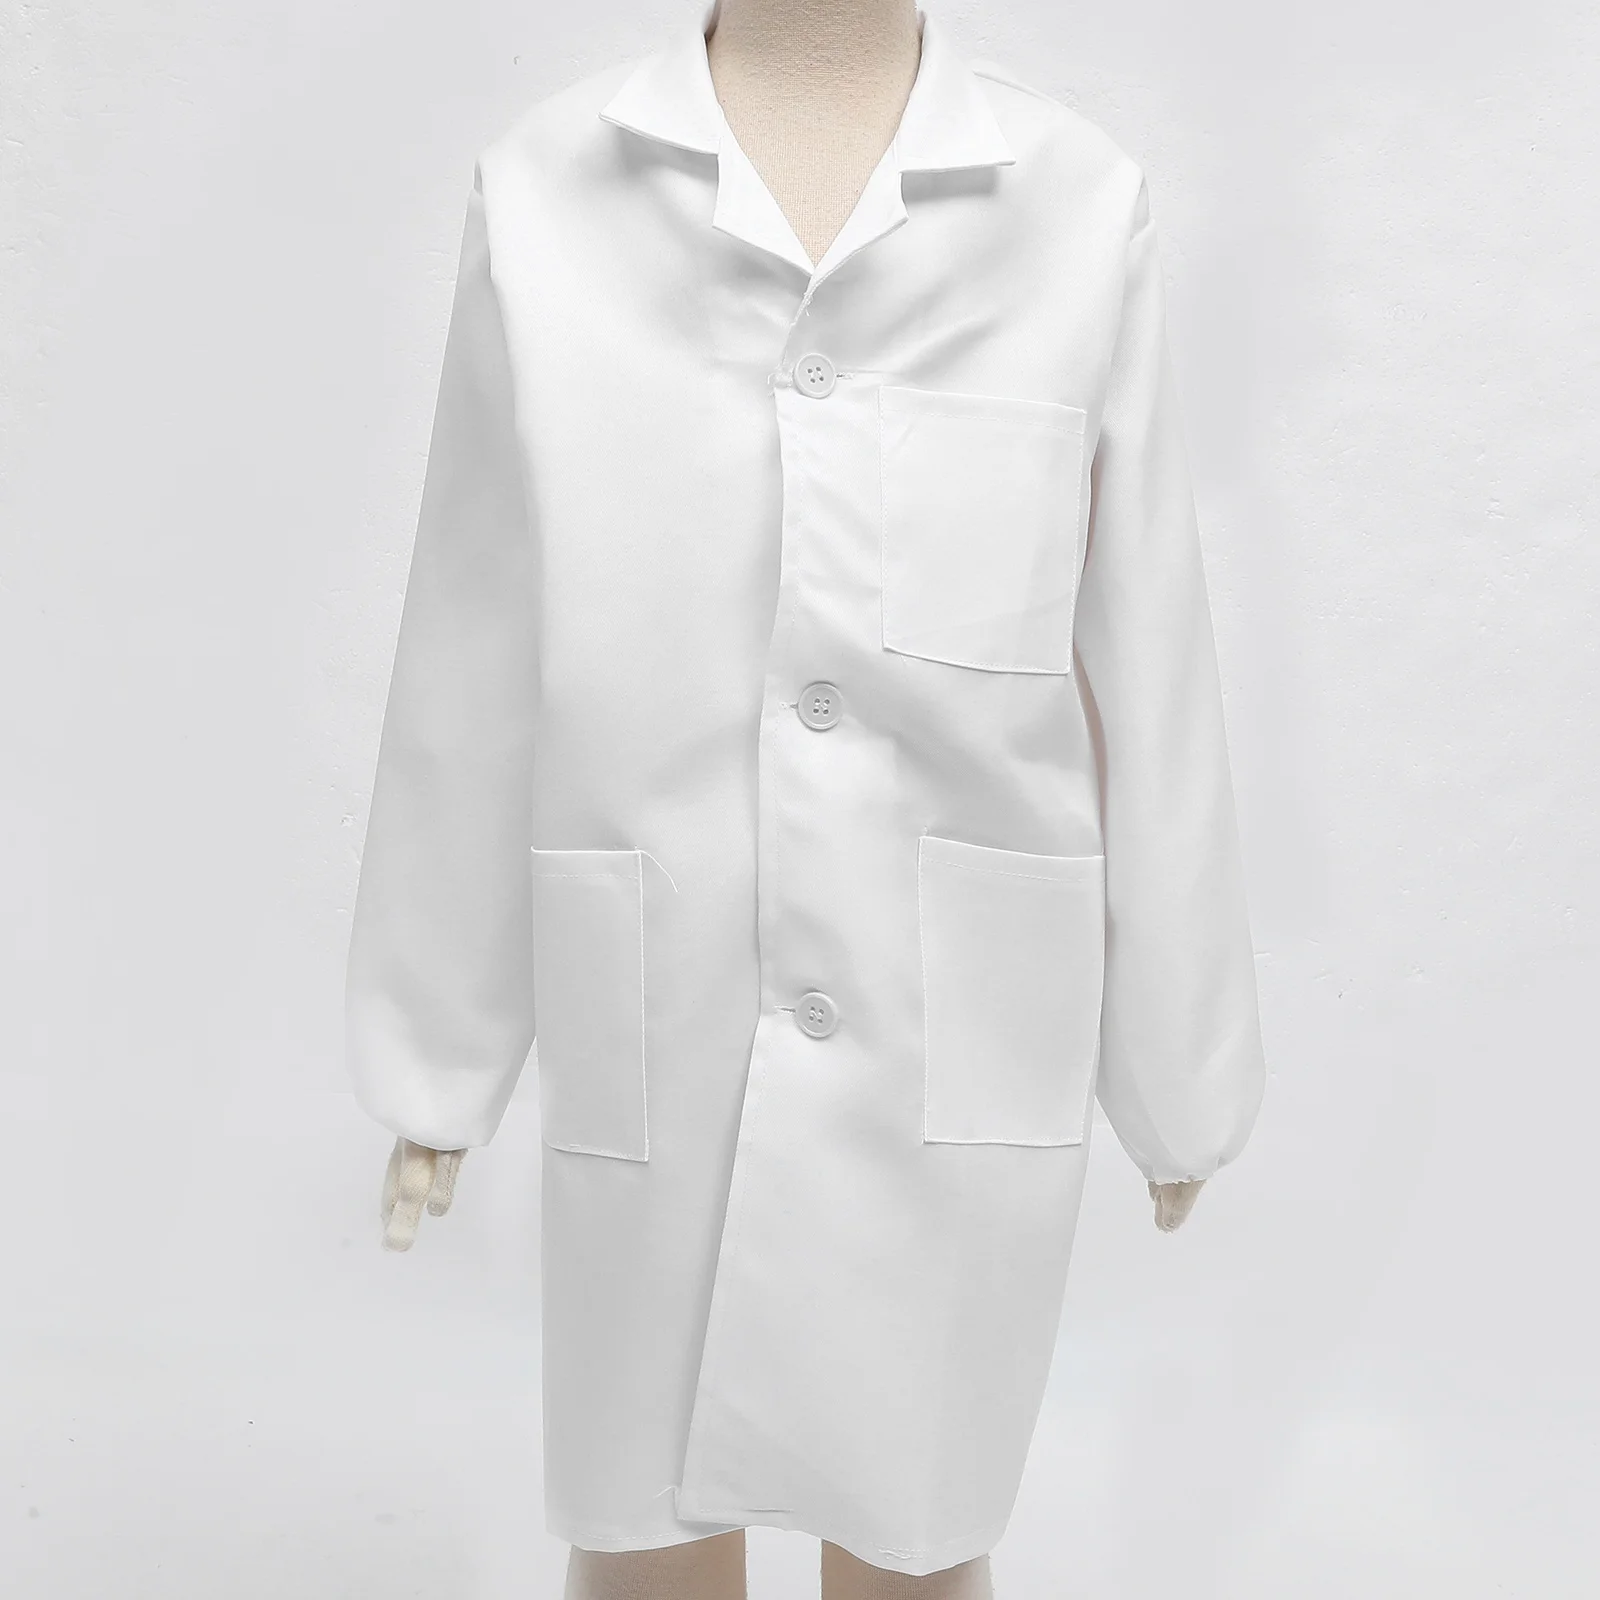 

Experimental Clothes Girls Reusable Kids Costume Lovely Scientist Coat White Lab for Primary School